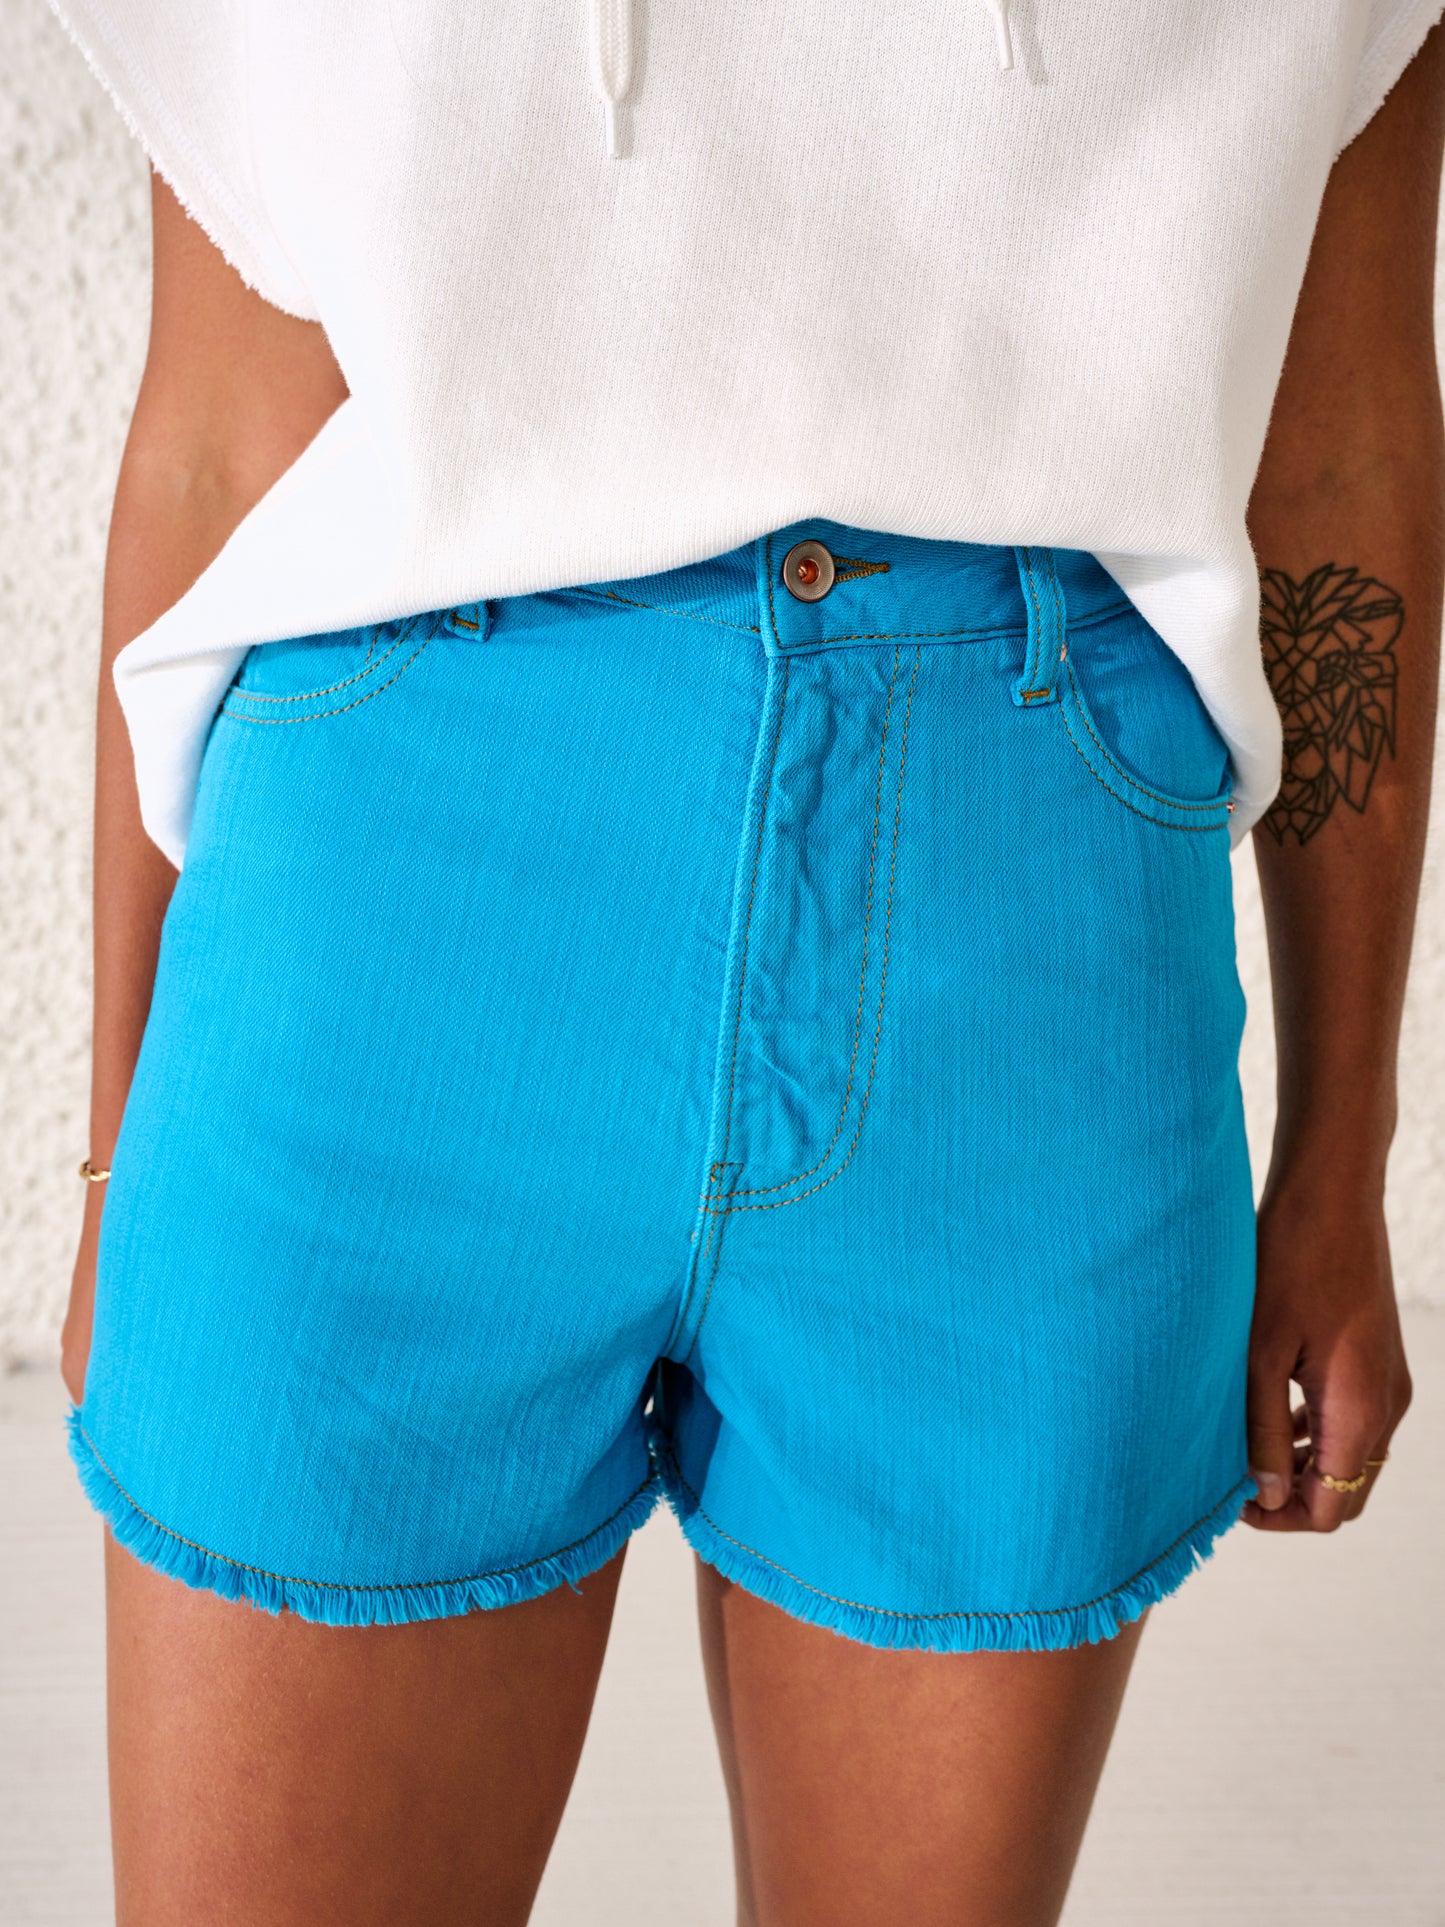 Bellerose - Party Shorts: Turquoise